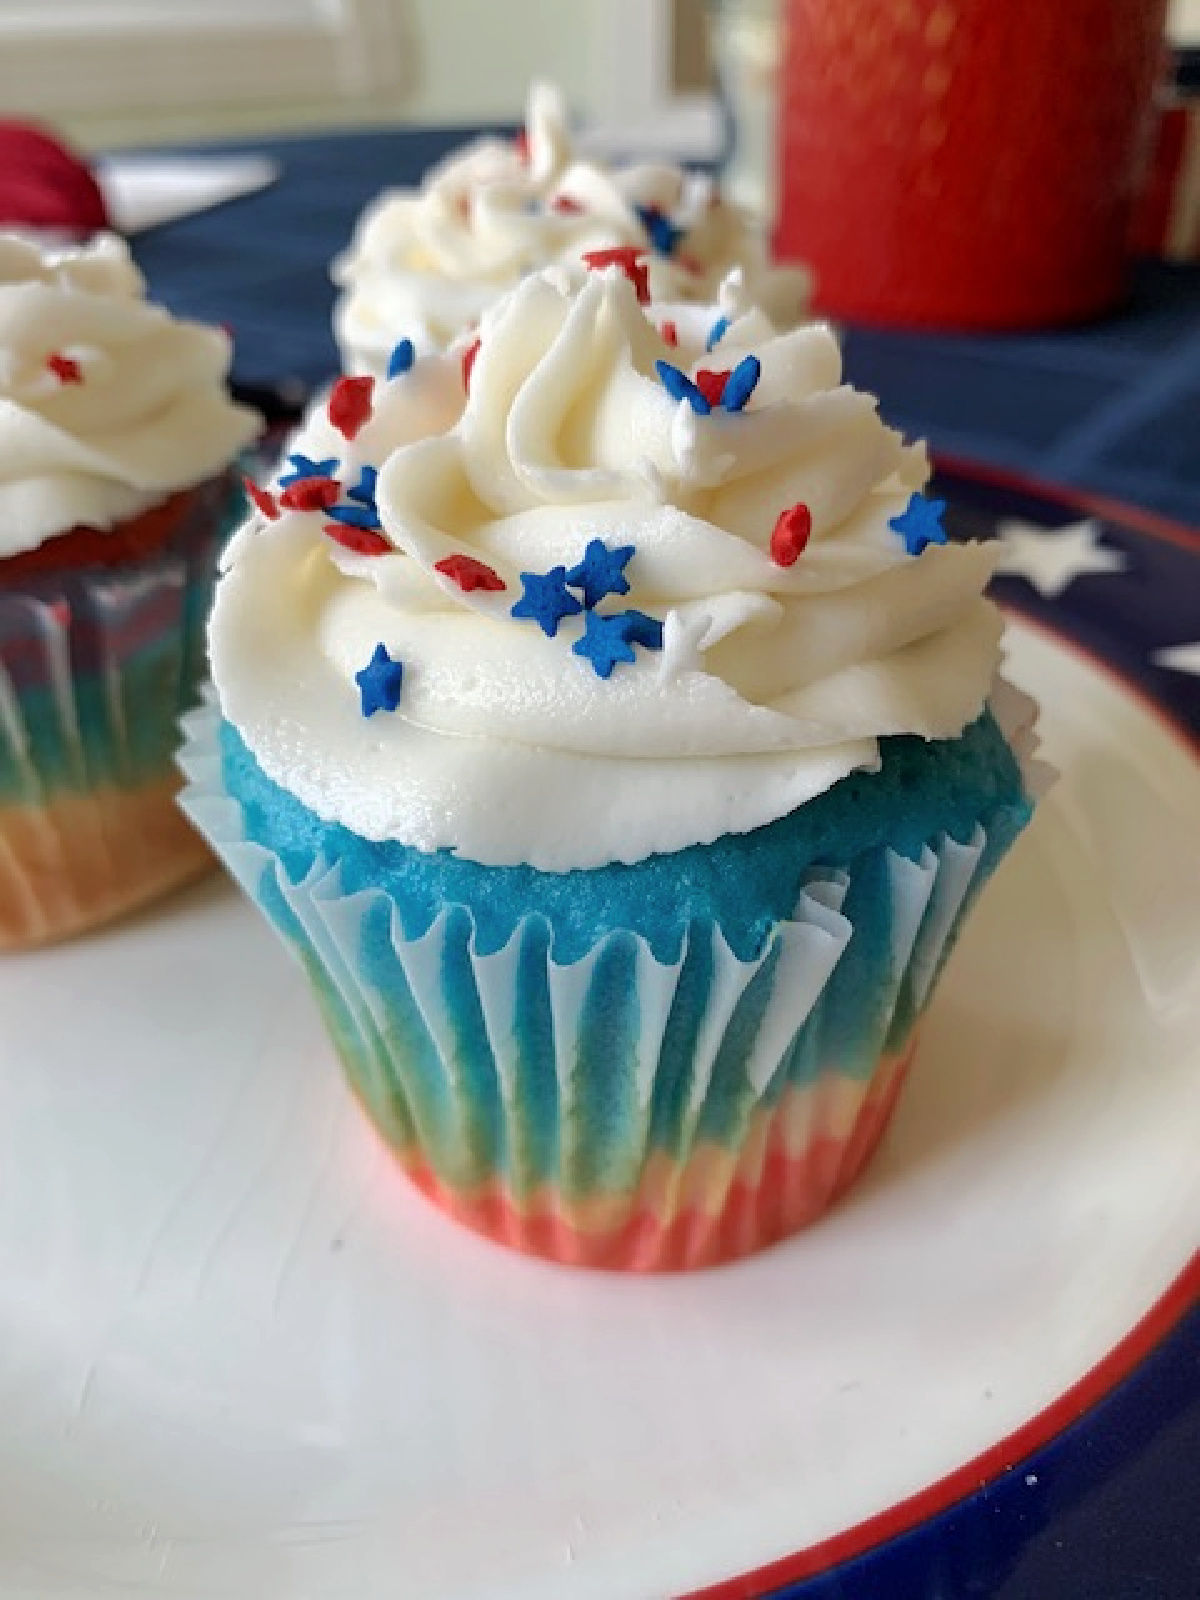 A red, white, and blue cupcake with white frosting and sprinkles of a plate.